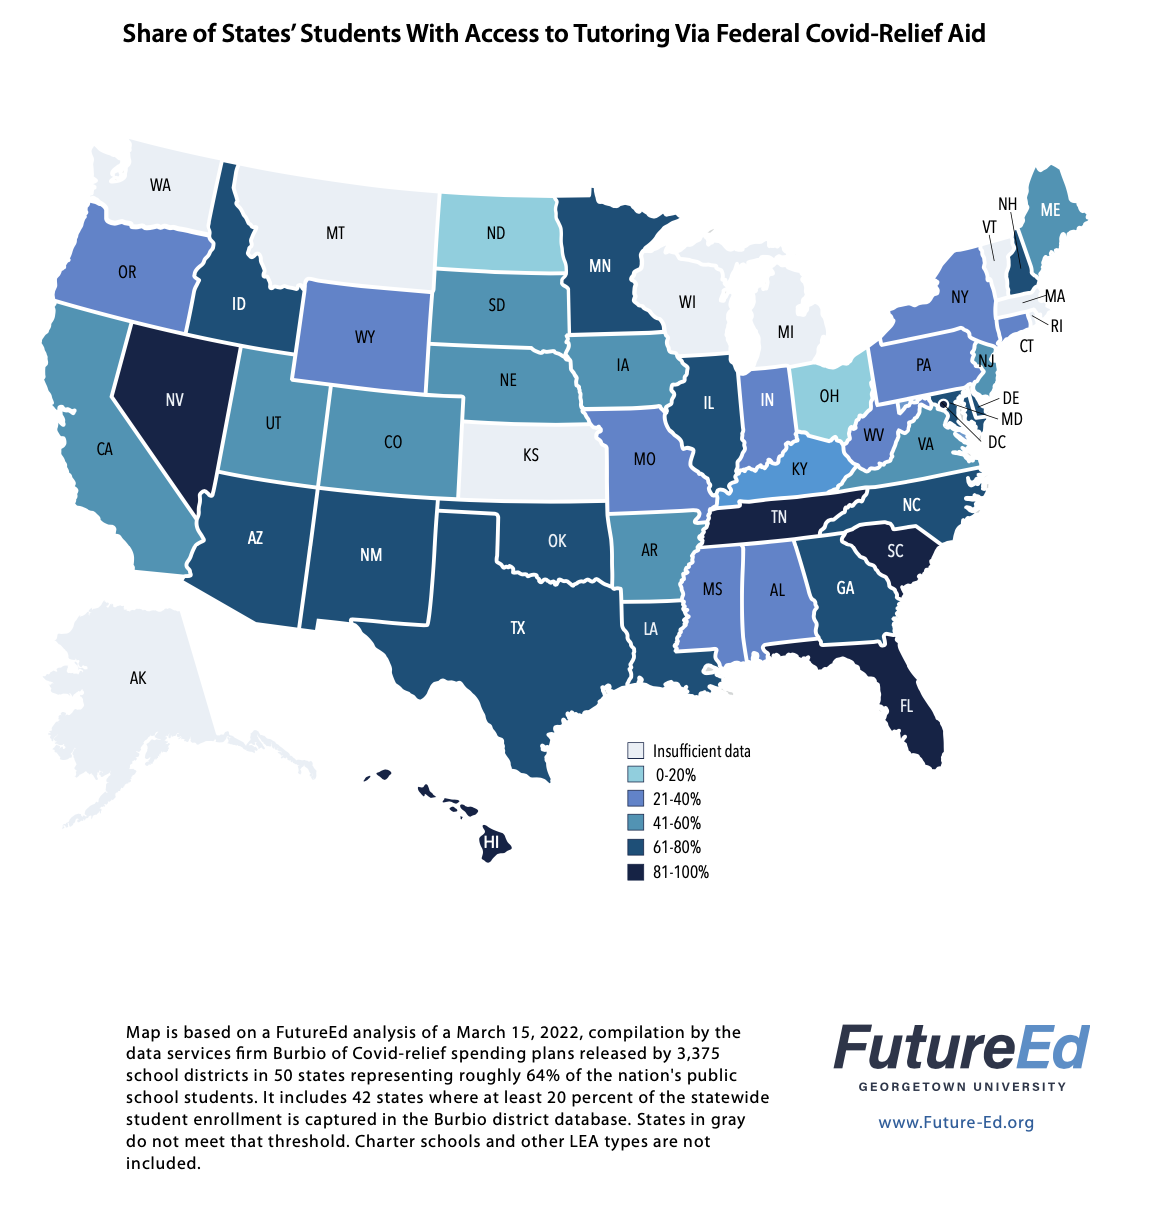 Thumbnail image of a map showing the share of state's students with access to tutoring via federal Covid-relief aid